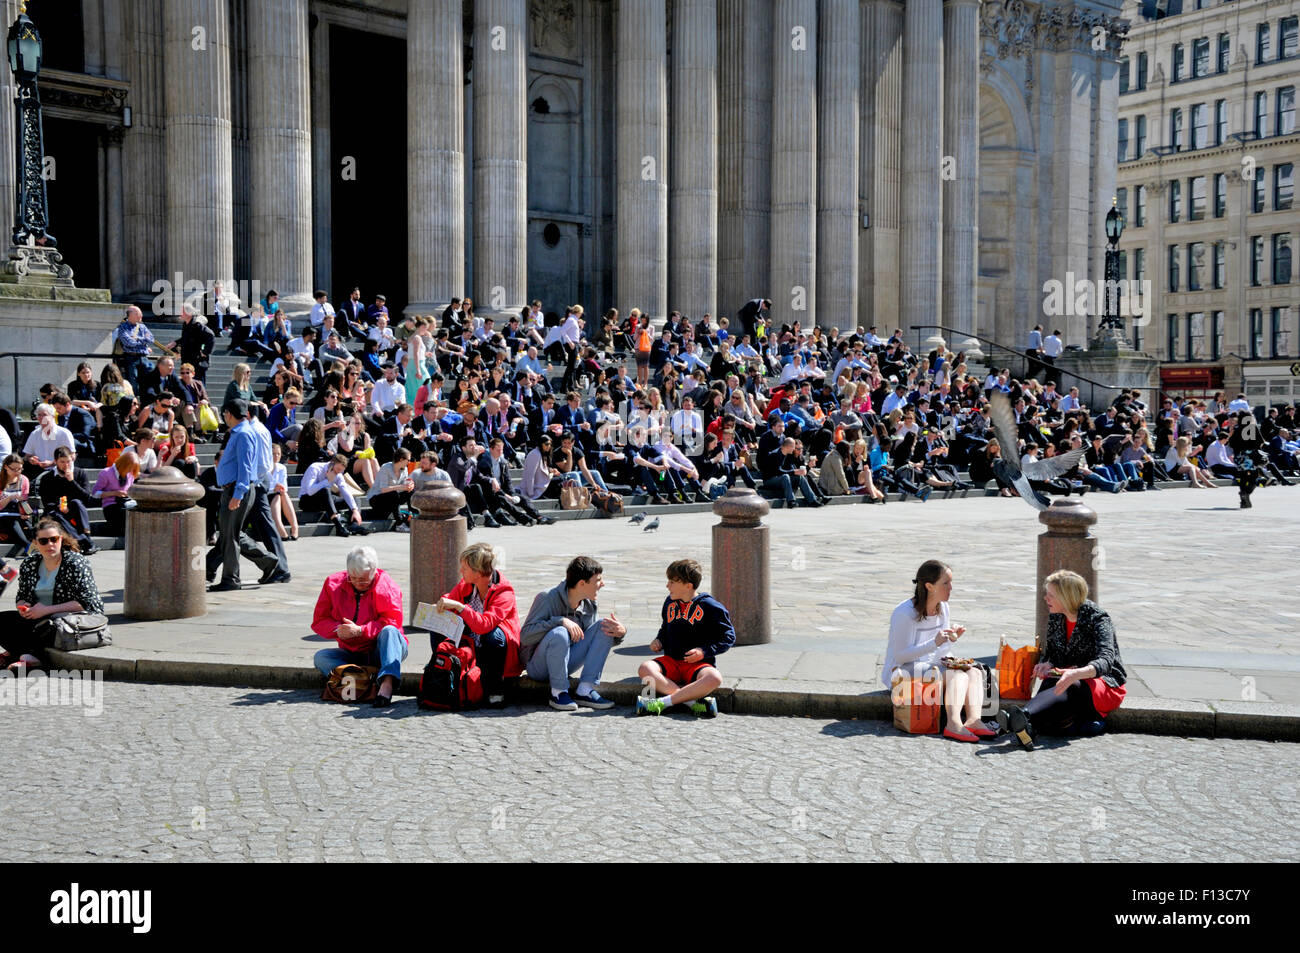 London, England, UK. People sitting in the sun on the steps of St Paul's Cathedral Stock Photo